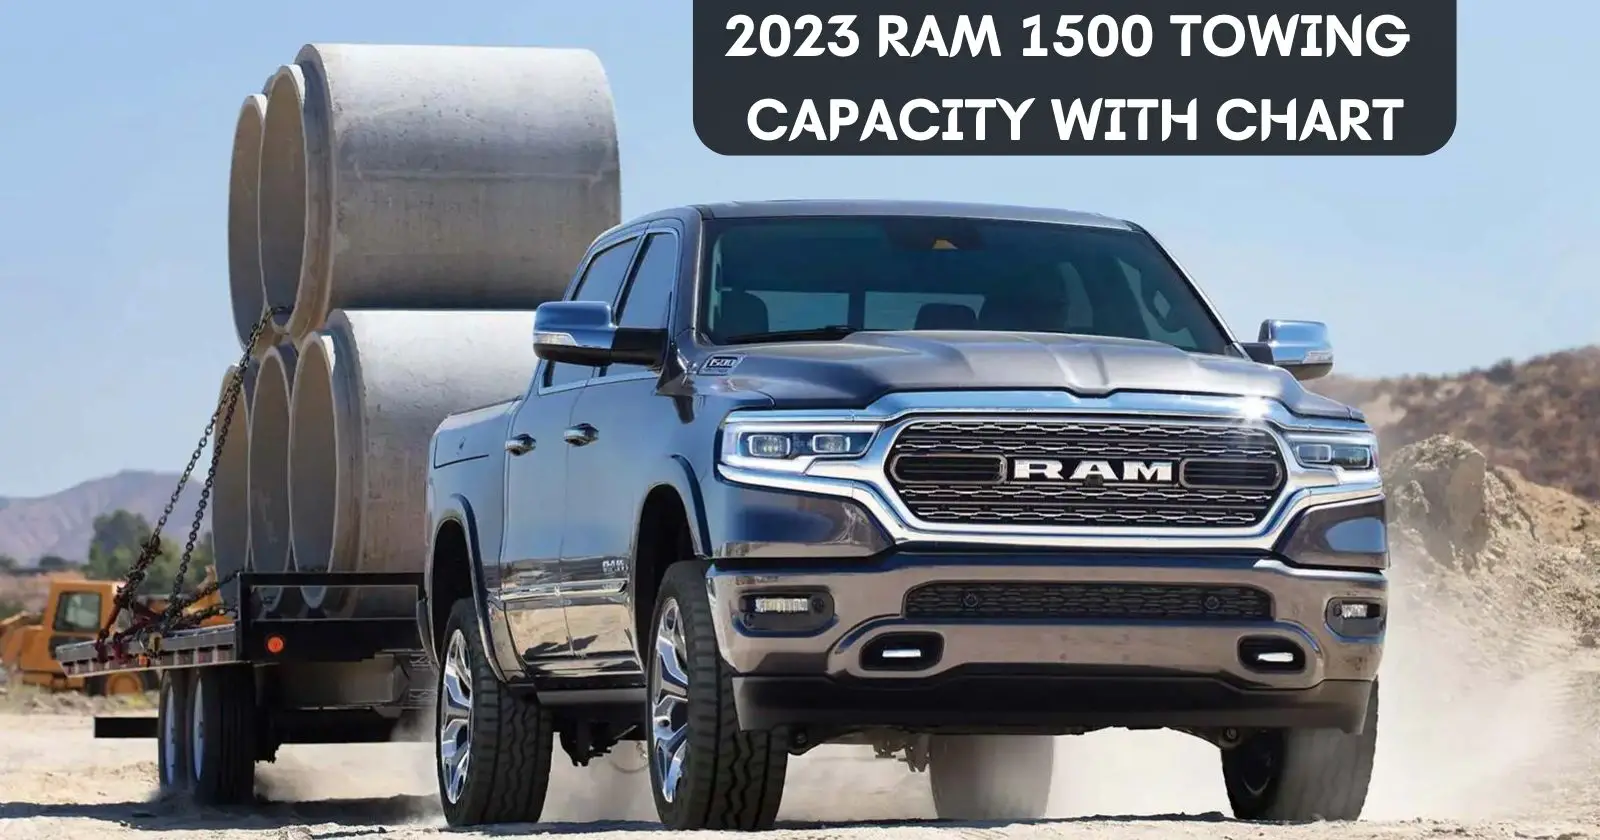 2023-ram-1500-towing-capacity-with-chart-thecartowing